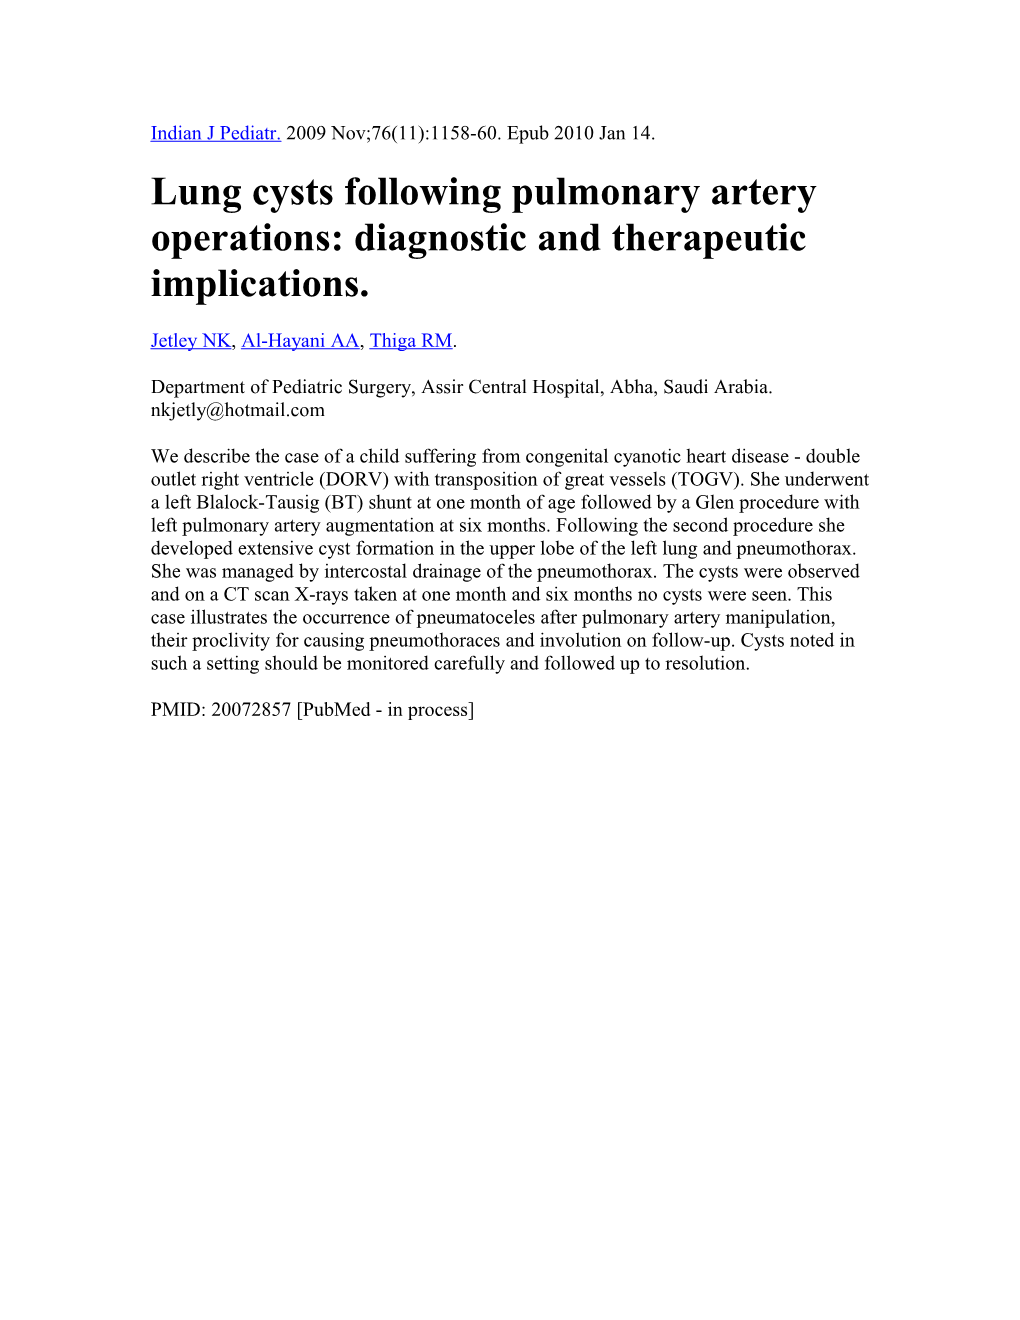 Lung Cysts Following Pulmonary Artery Operations: Diagnostic and Therapeutic Implications